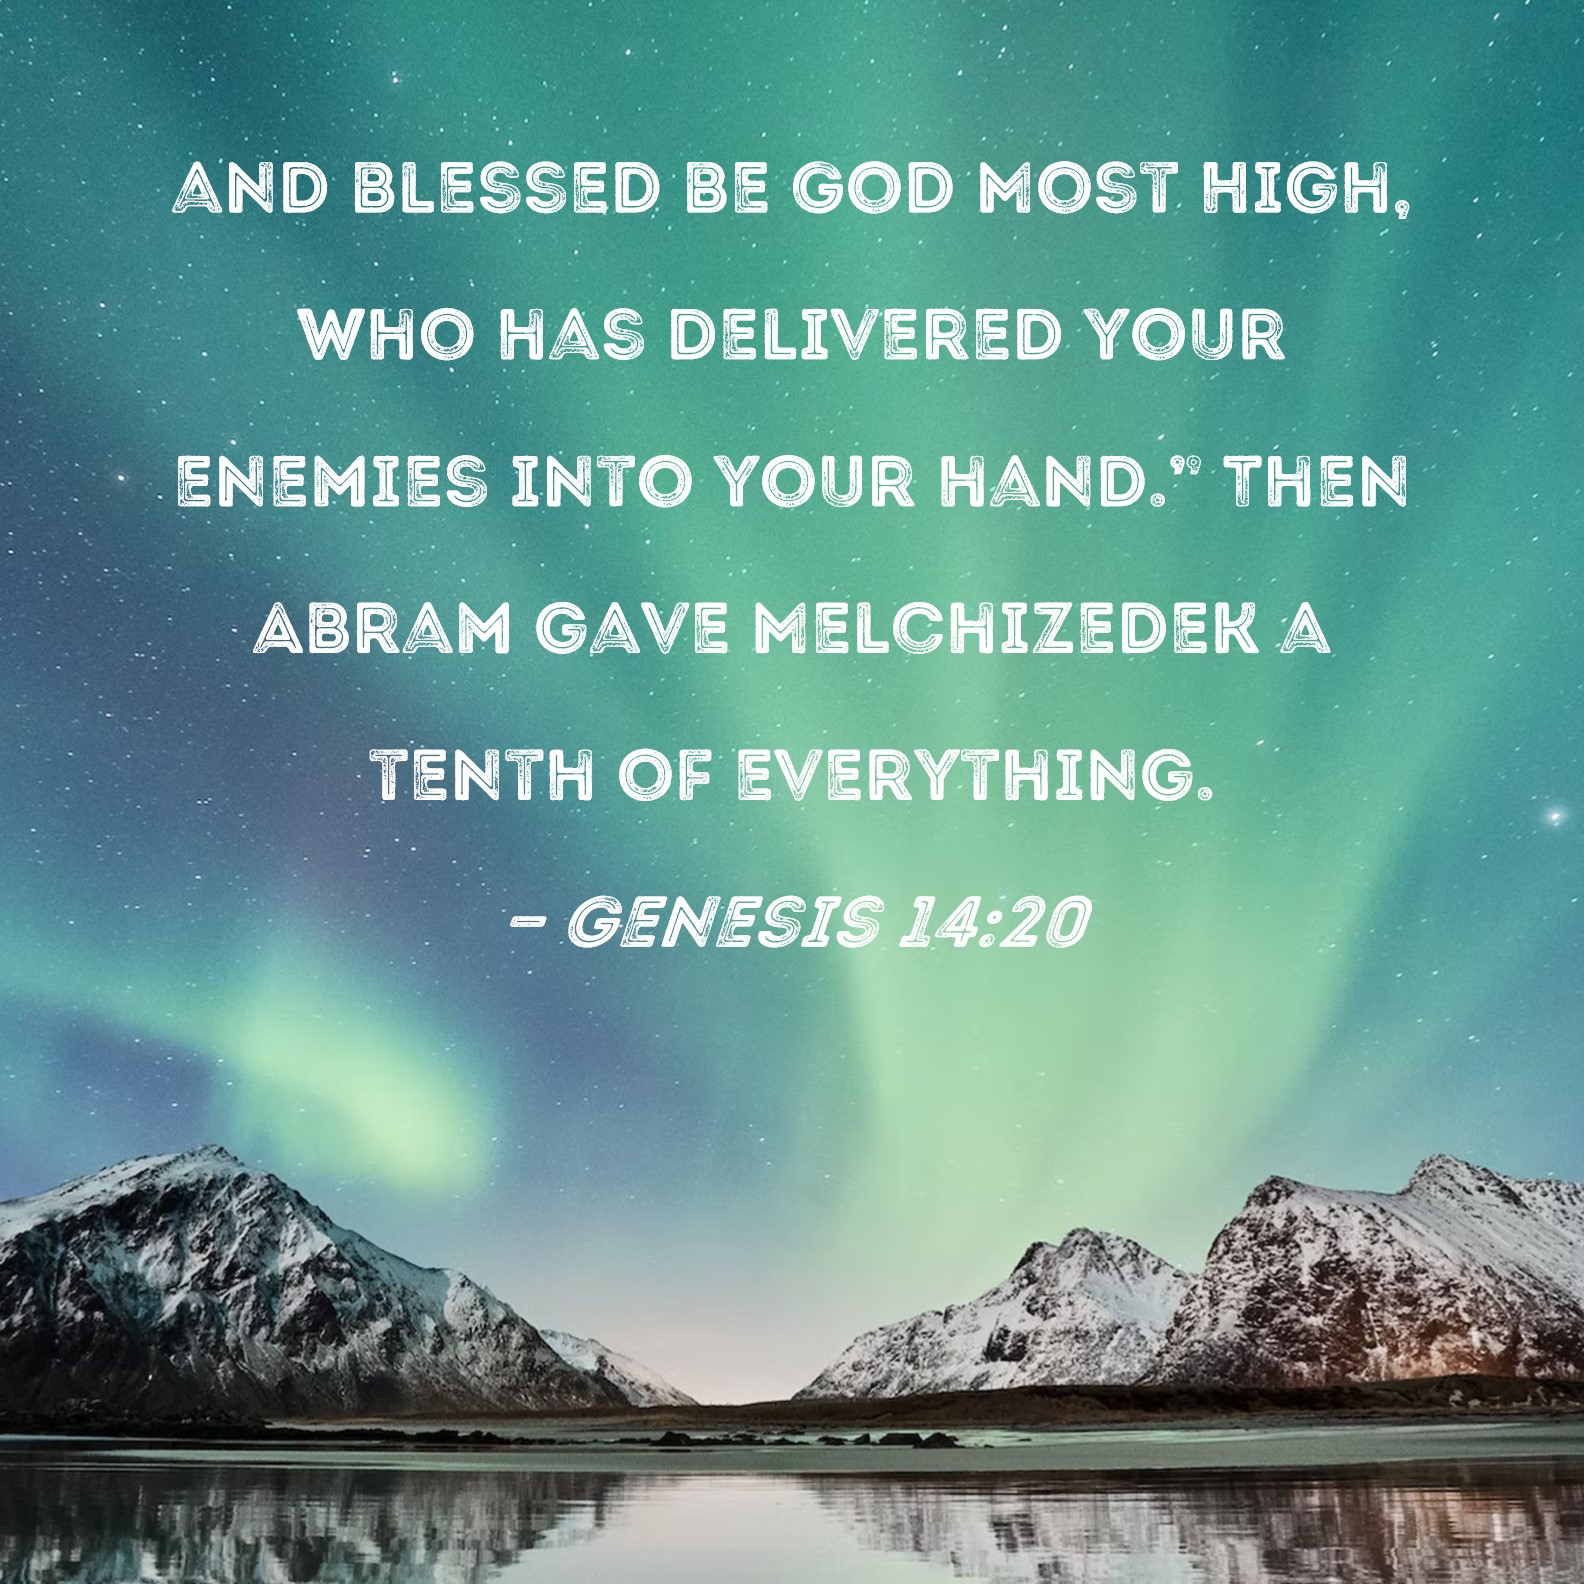 Genesis 14 20 And Blessed Be God Most High Who Has Delivered Your